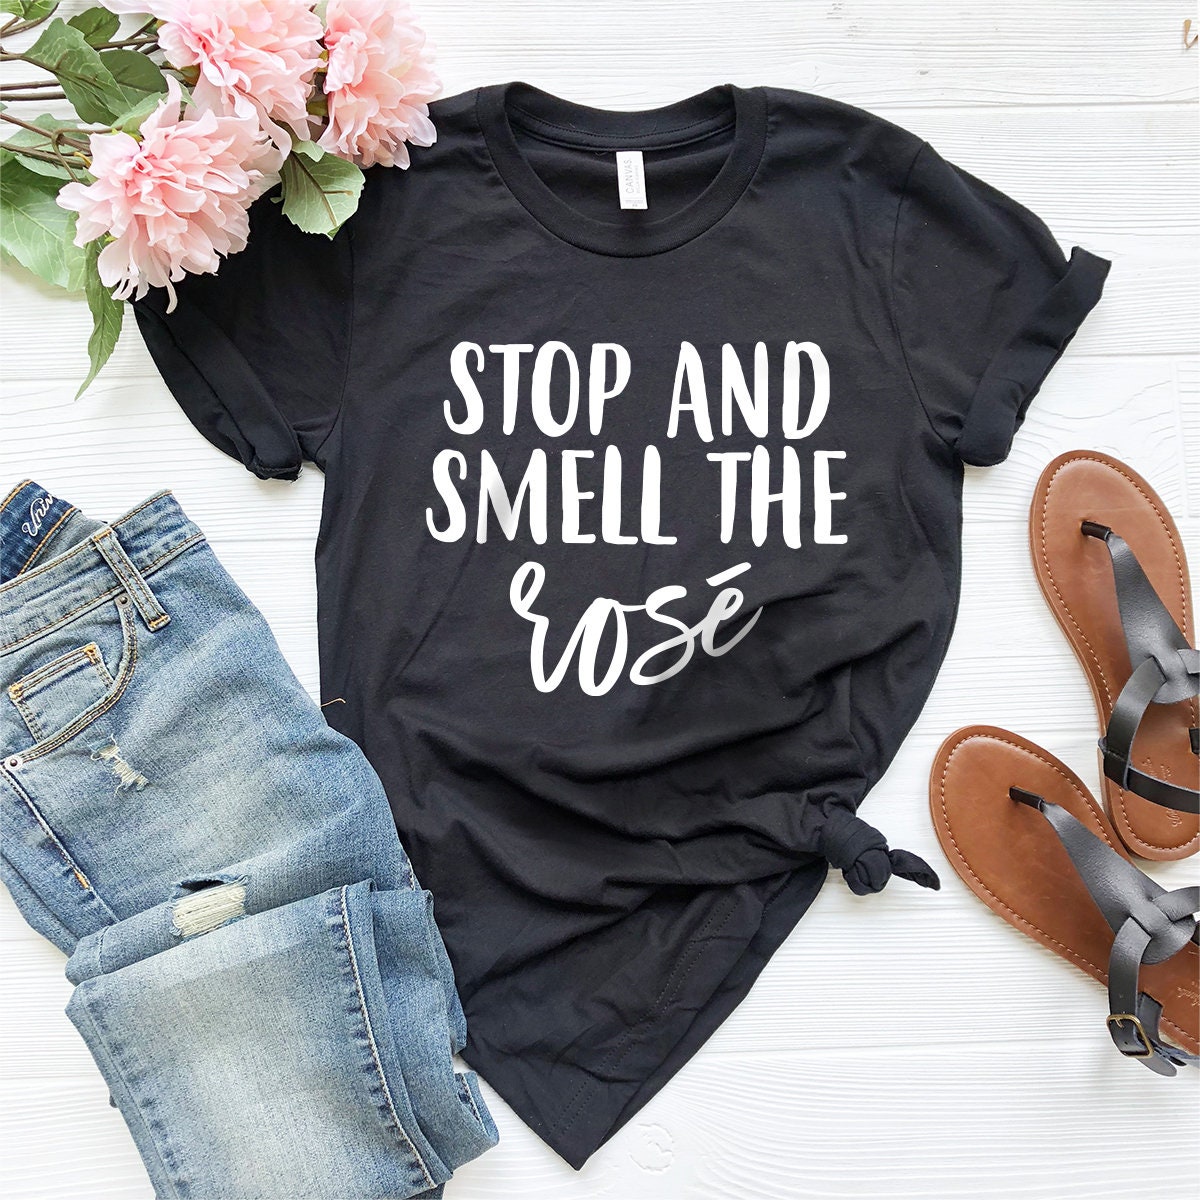 Stop And Smell The Rose T-Shirt, Wine Shirt, Wine Lover Shirt, Wine Tee, Funny Wine Shirt, Drinking Shirt, Wine Tshirt, Drinker Shirt - Fastdeliverytees.com